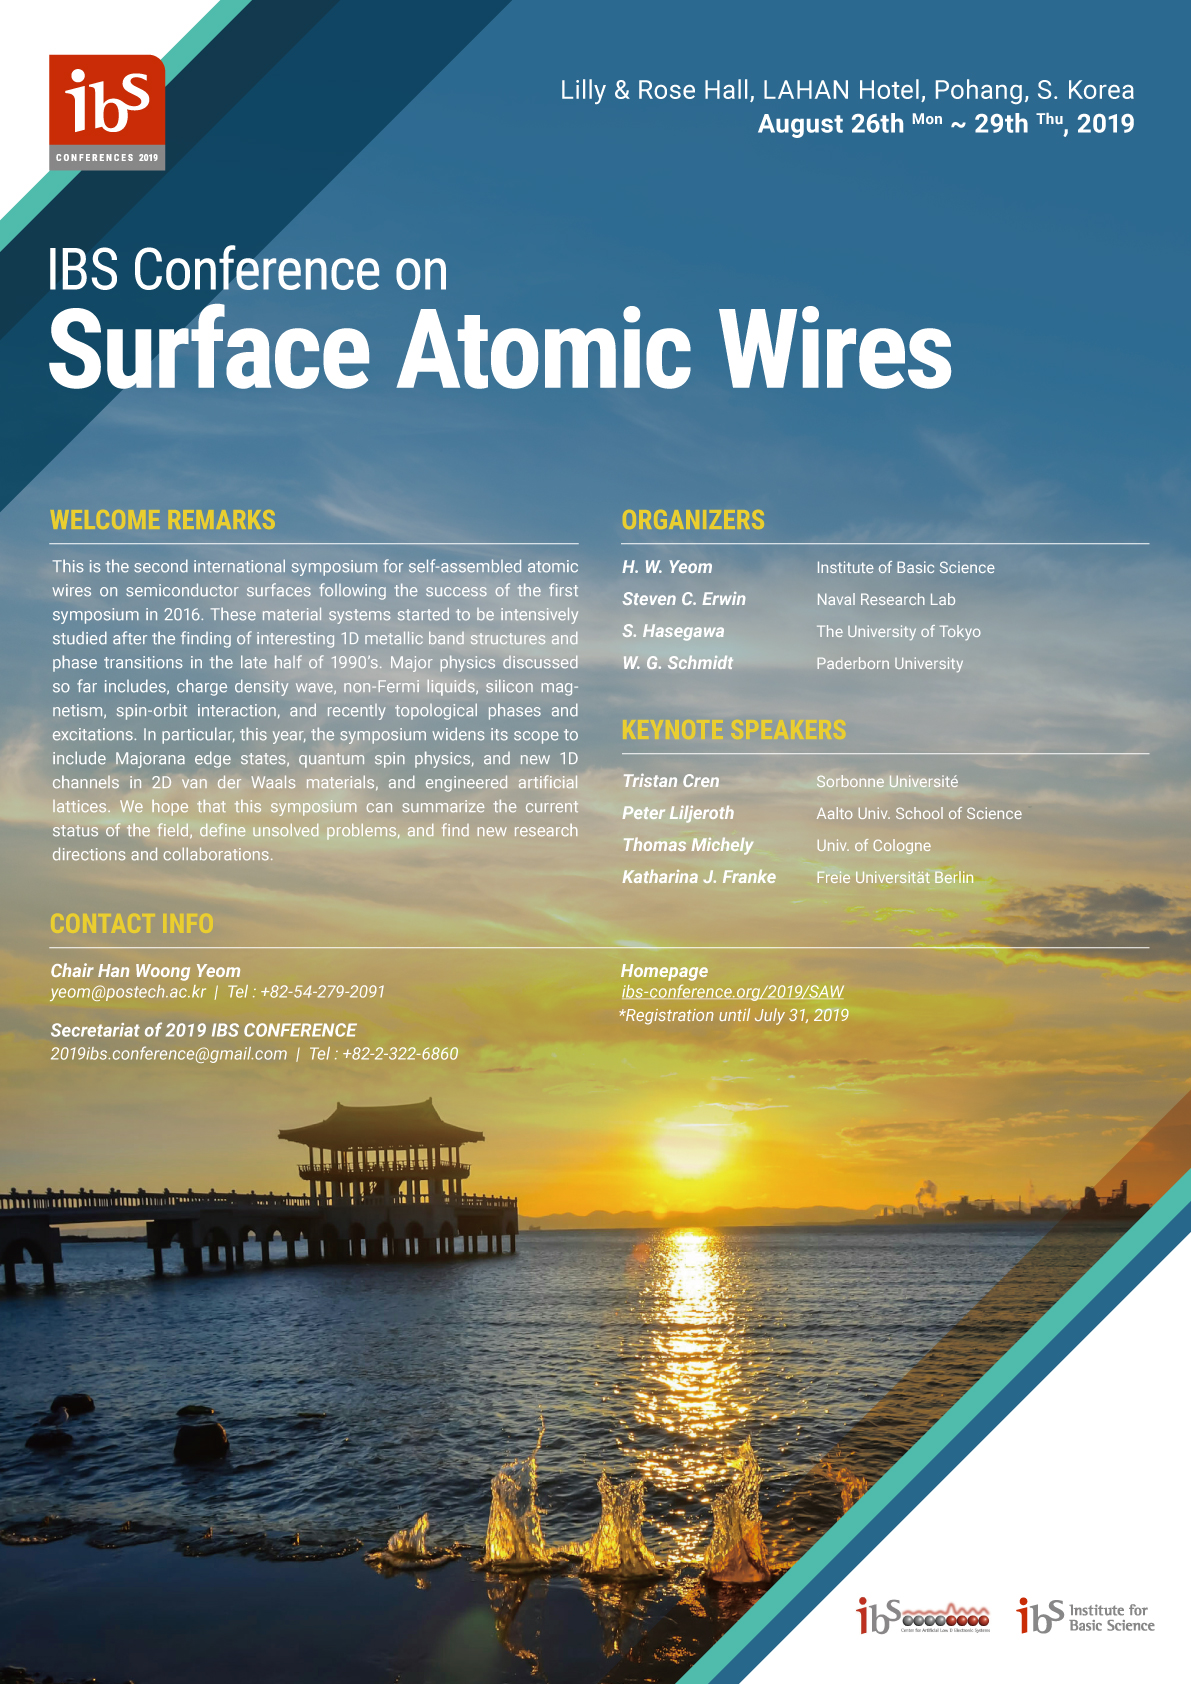 IBS conference on Surface Atomic Wires